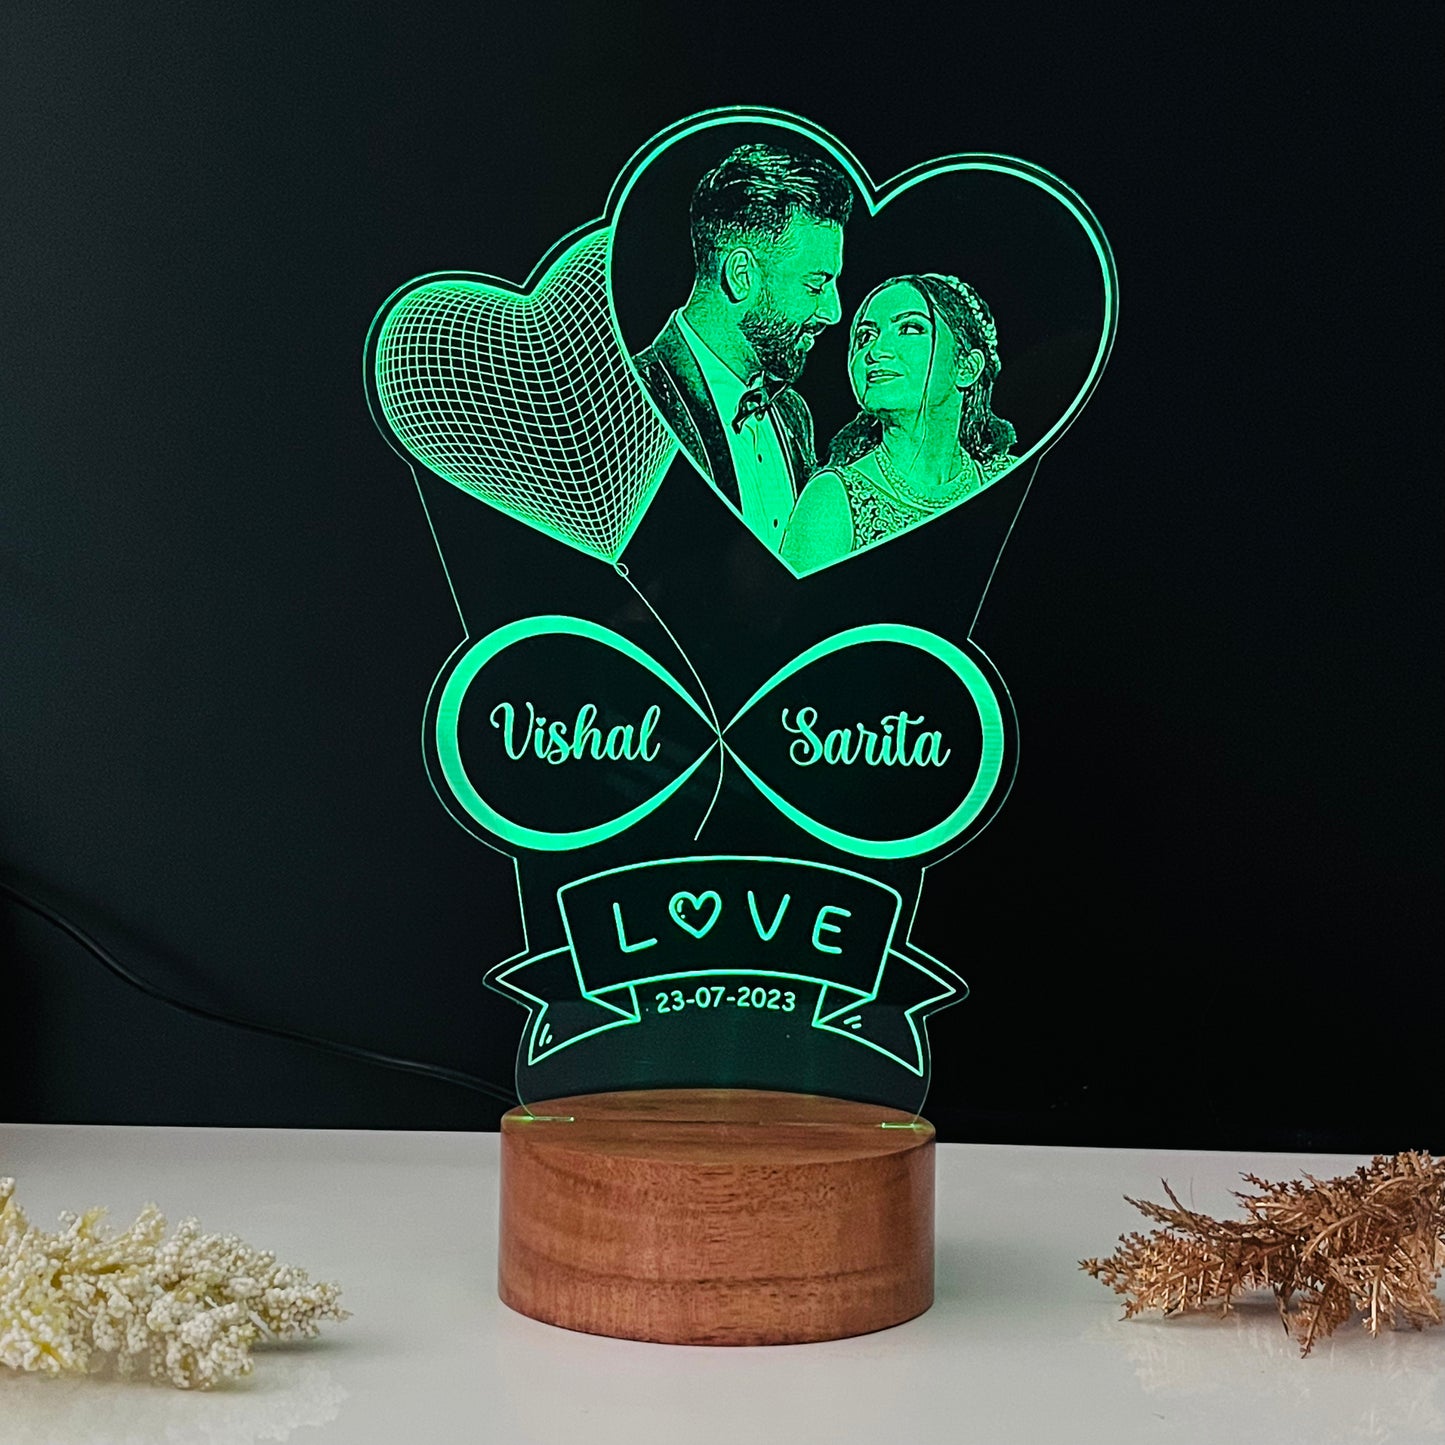 Couple Photo, Names & Date Lamp